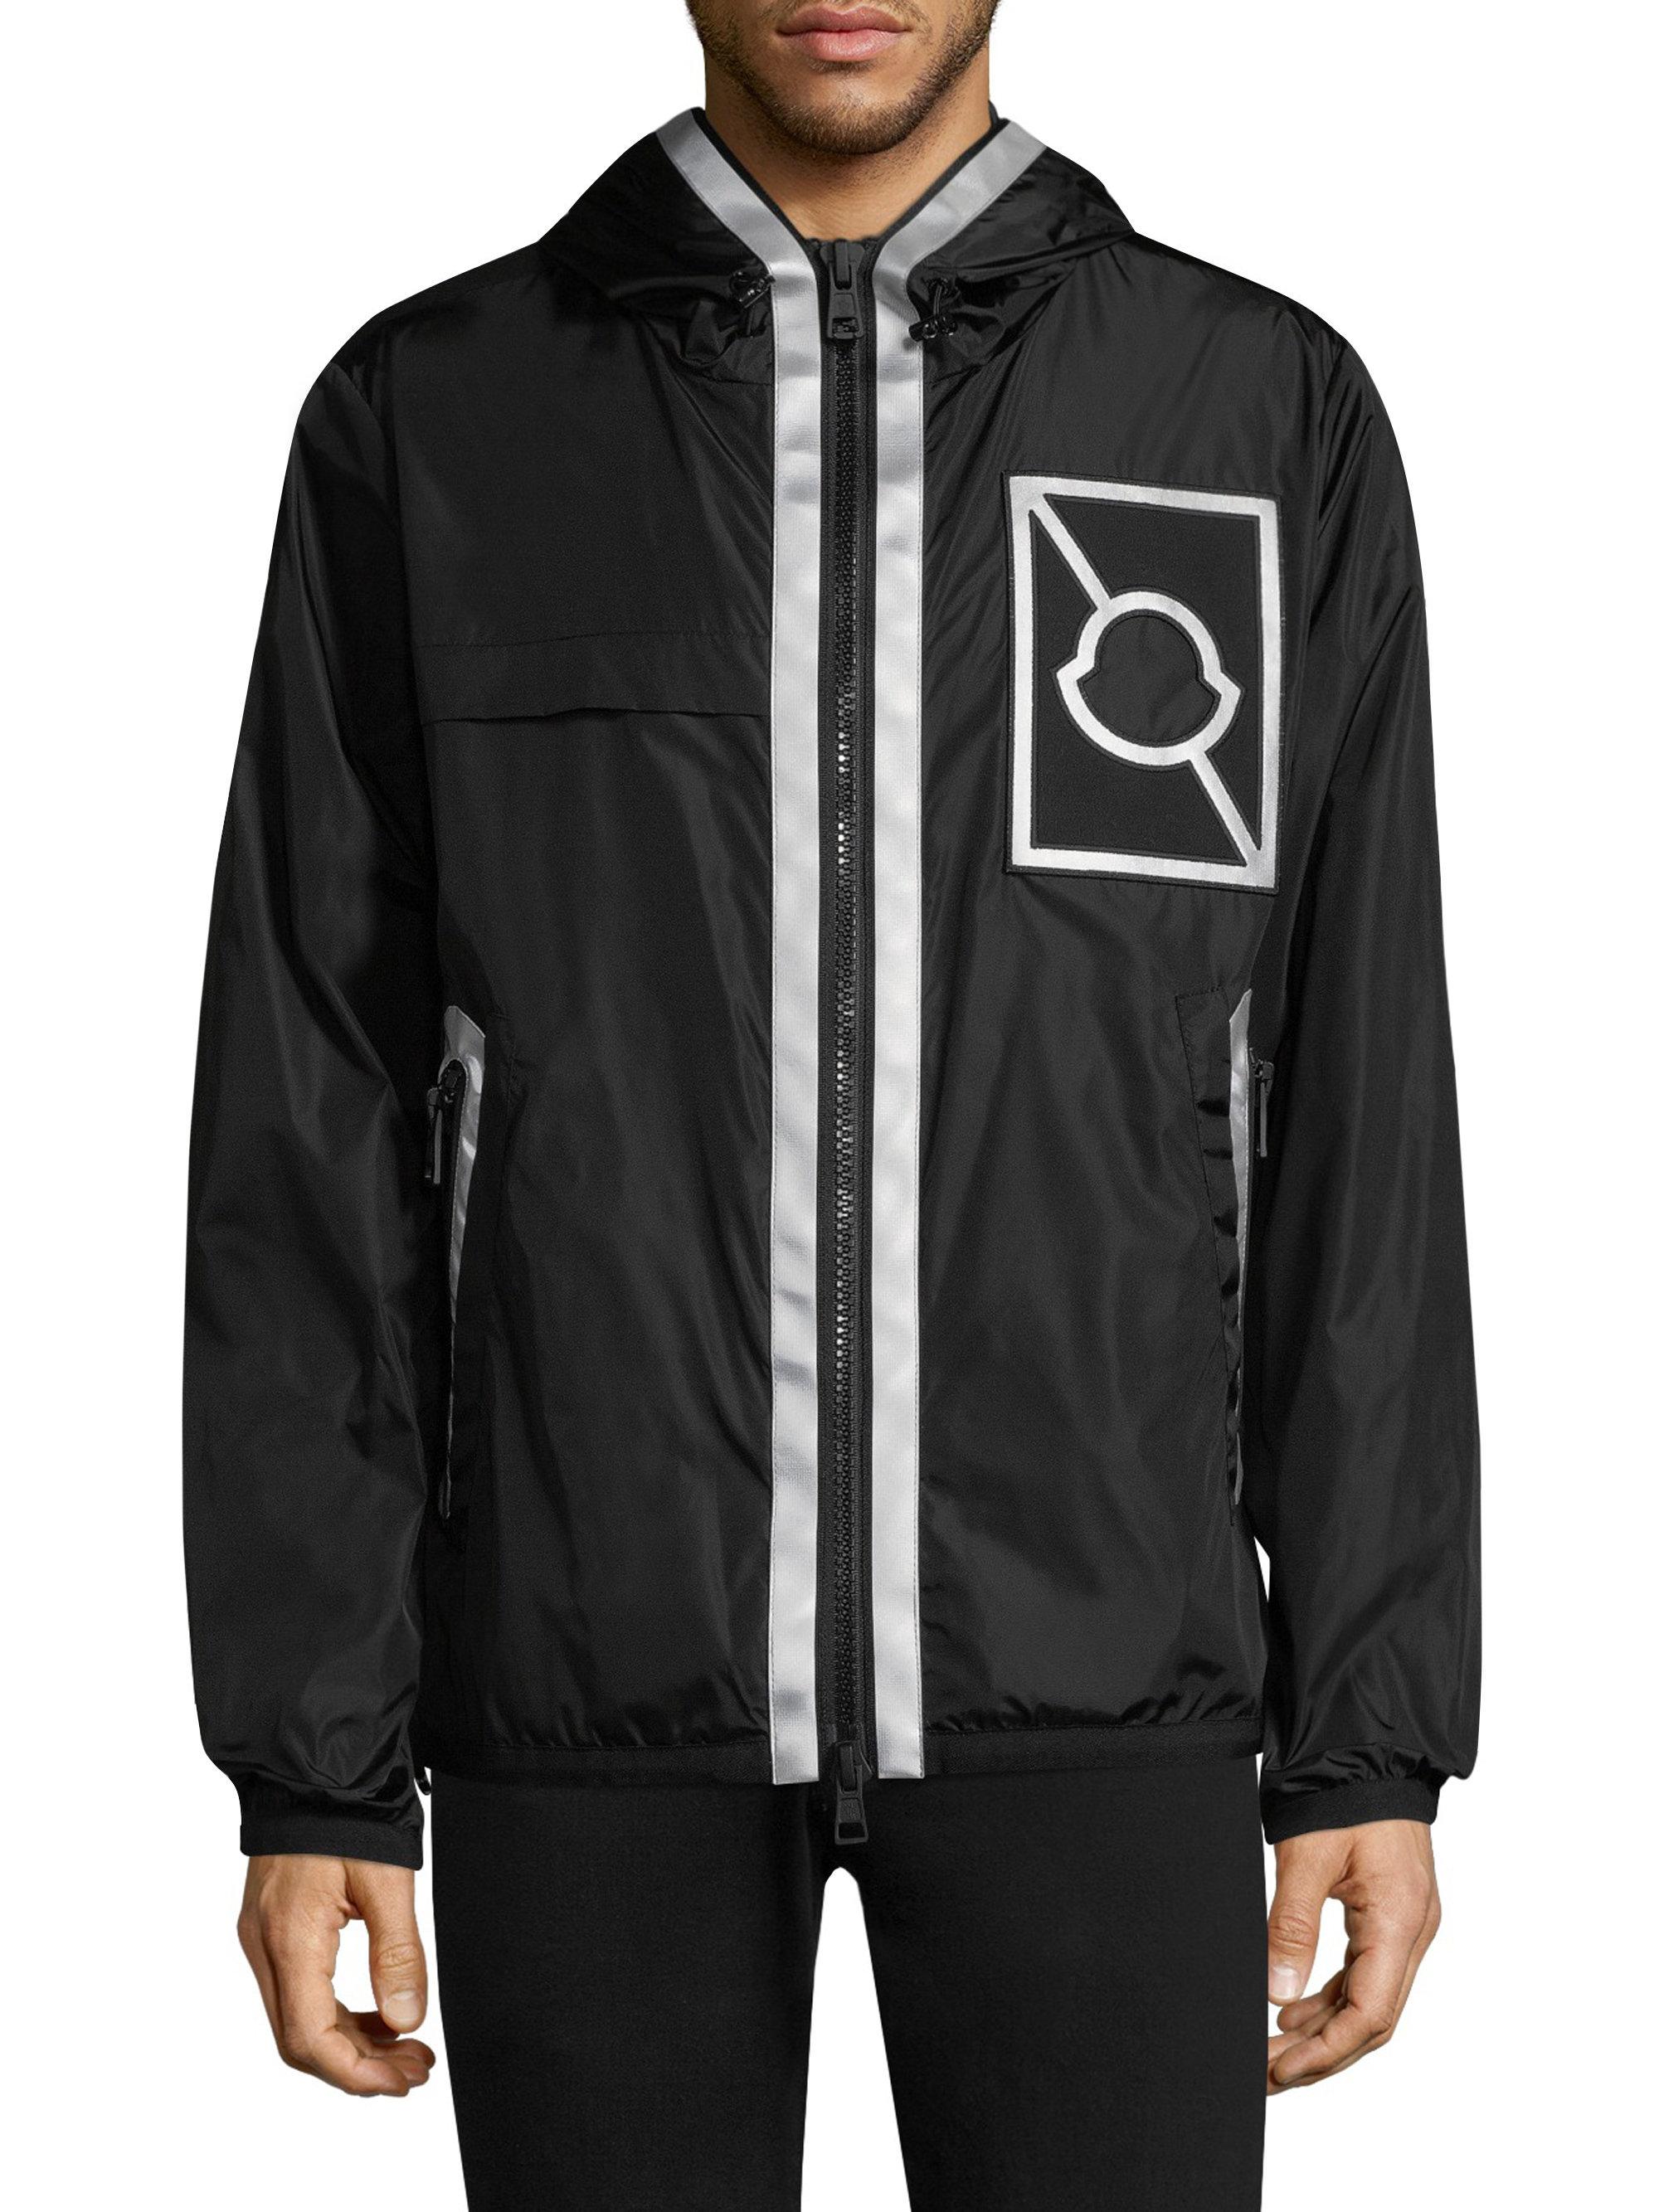 Moncler Reflective Jacket Clearance, 57% OFF | www.ilpungolo.org